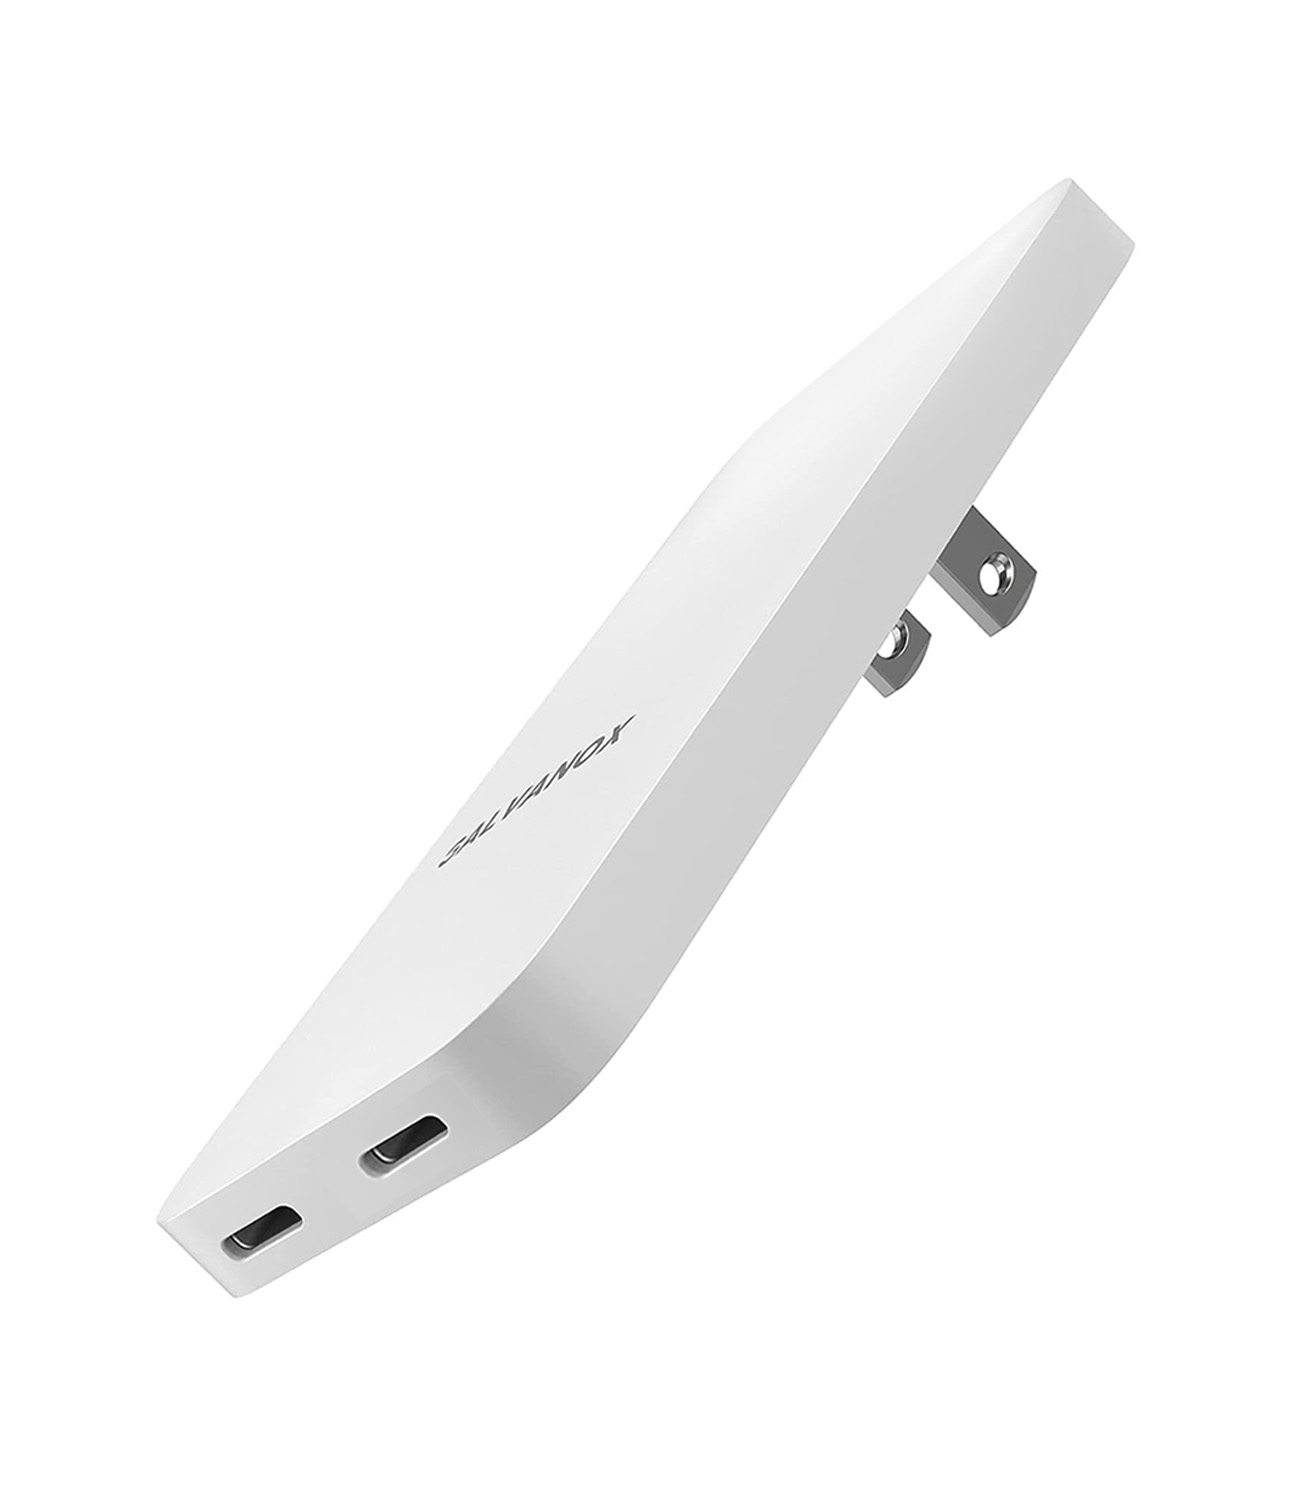 Galvanox MagSafe Powerbank with USB-C Cable in White - Encased